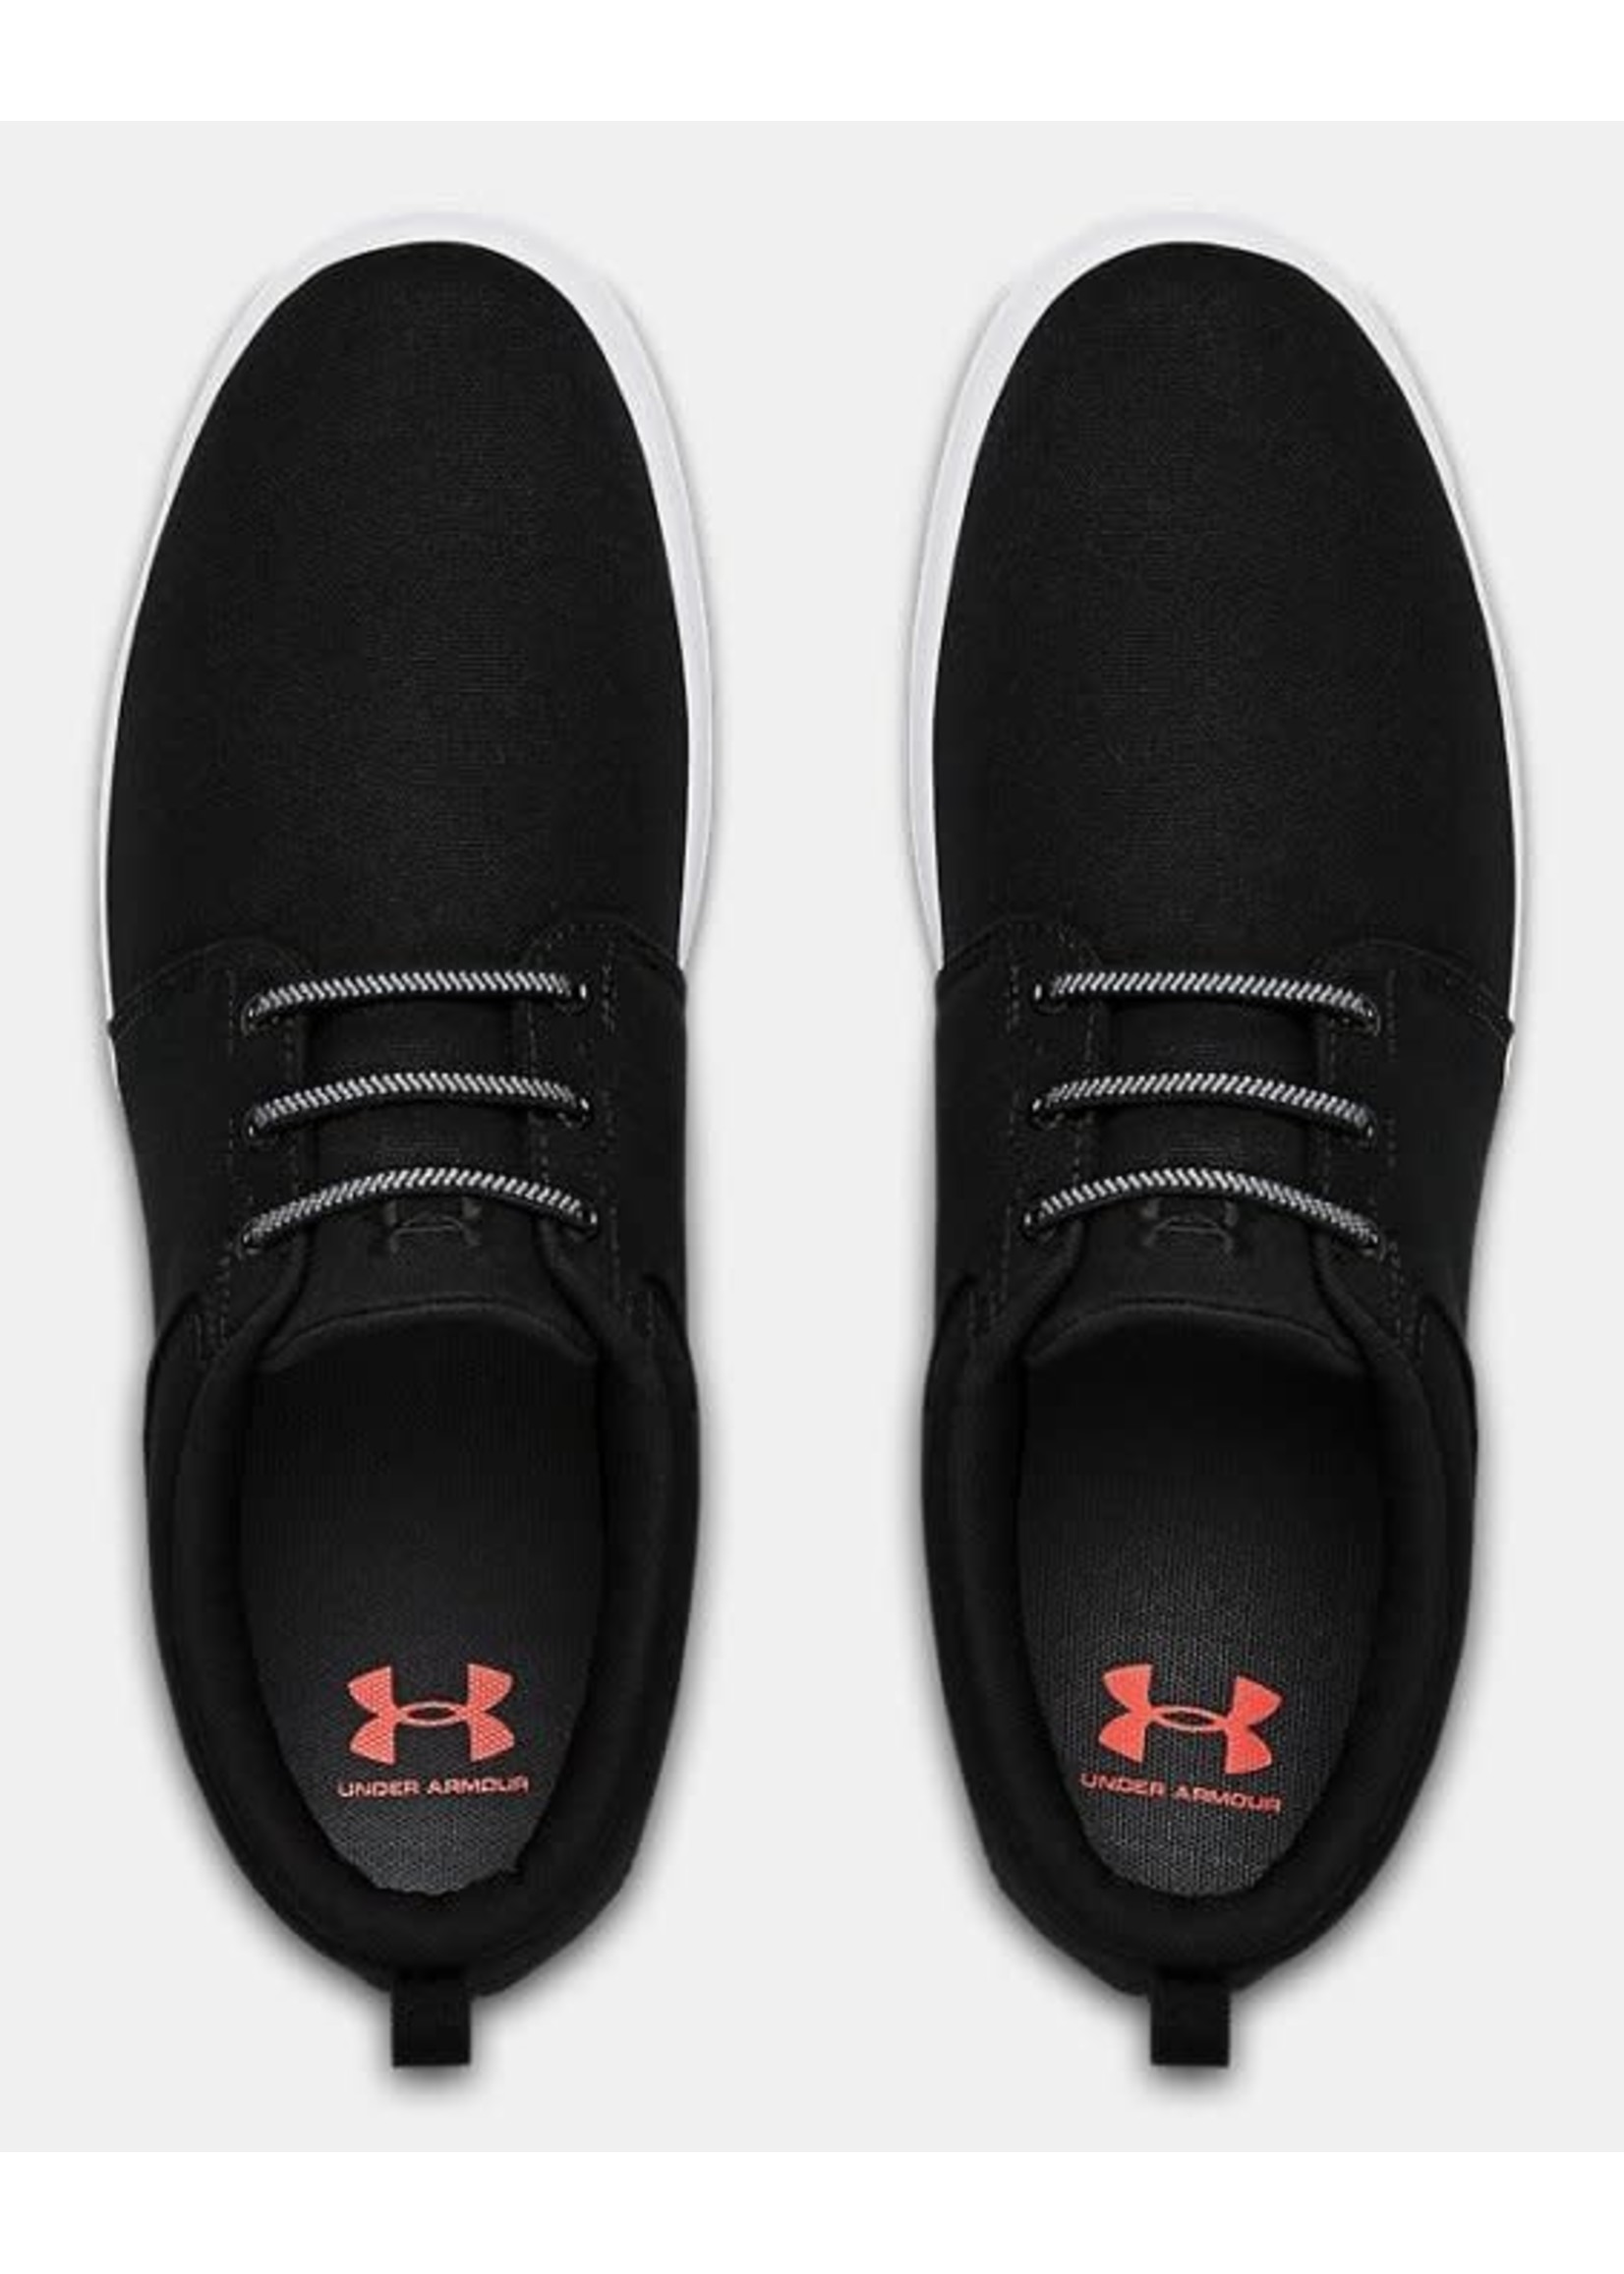 UNDER ARMOUR Souliers Street Encounter IV Slides